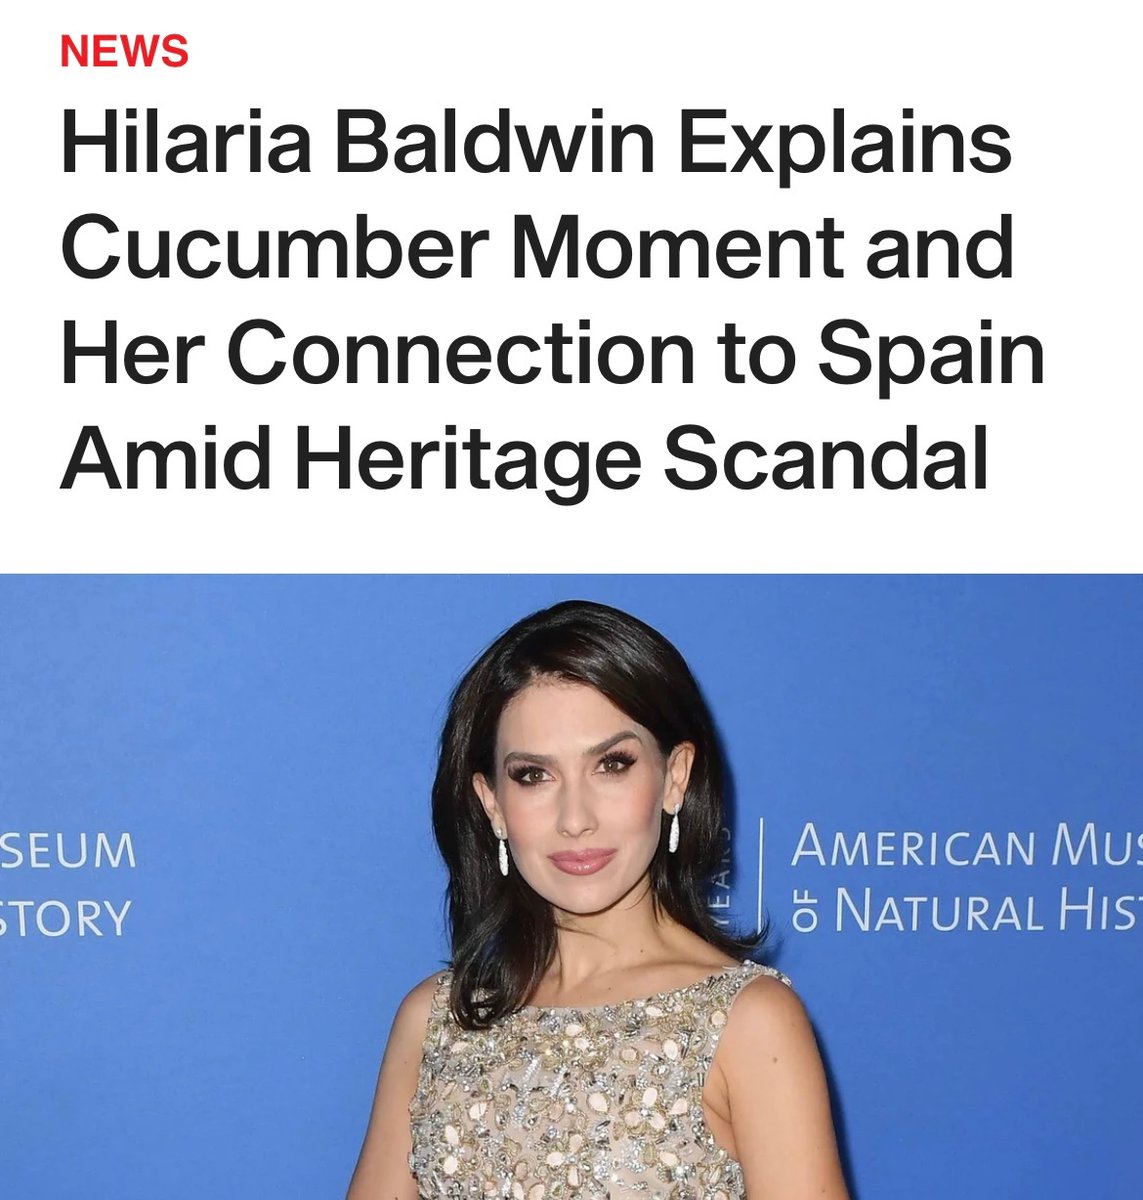 Nigeria is Rachel Meghan’s country as much as Spain is Hilaria Baldwin’s country, IT’s  NOT. Stop the Phoniness! Rachel is a Fraud. “Um, How do you say in English? Cucumber” 🤦‍♀️😂
#MeghanMarkleIsAGrifter
#FOMeghan
#MeghanMarkleIsAConArtist 
#FOHarryandMeghan
#Markled